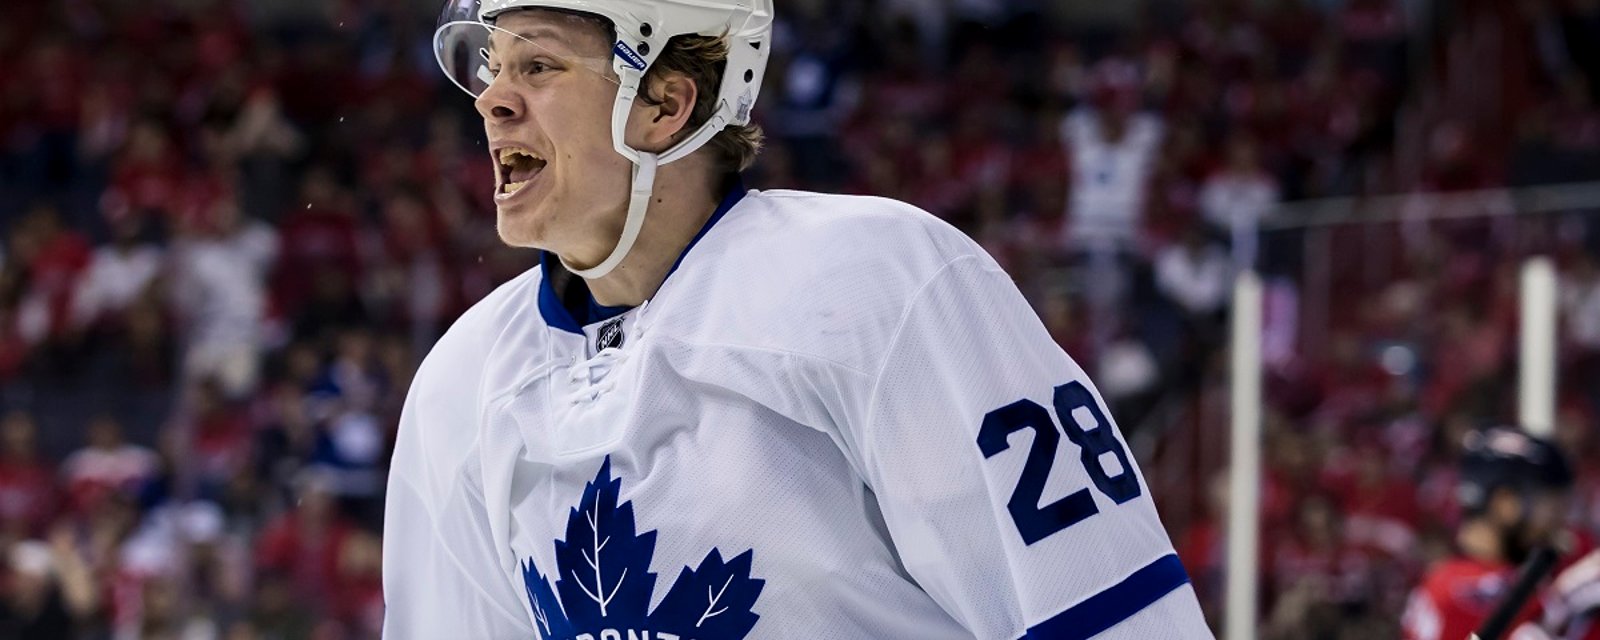 Leafs replace Kasperi Kapanen in the lineup just minutes before the game!